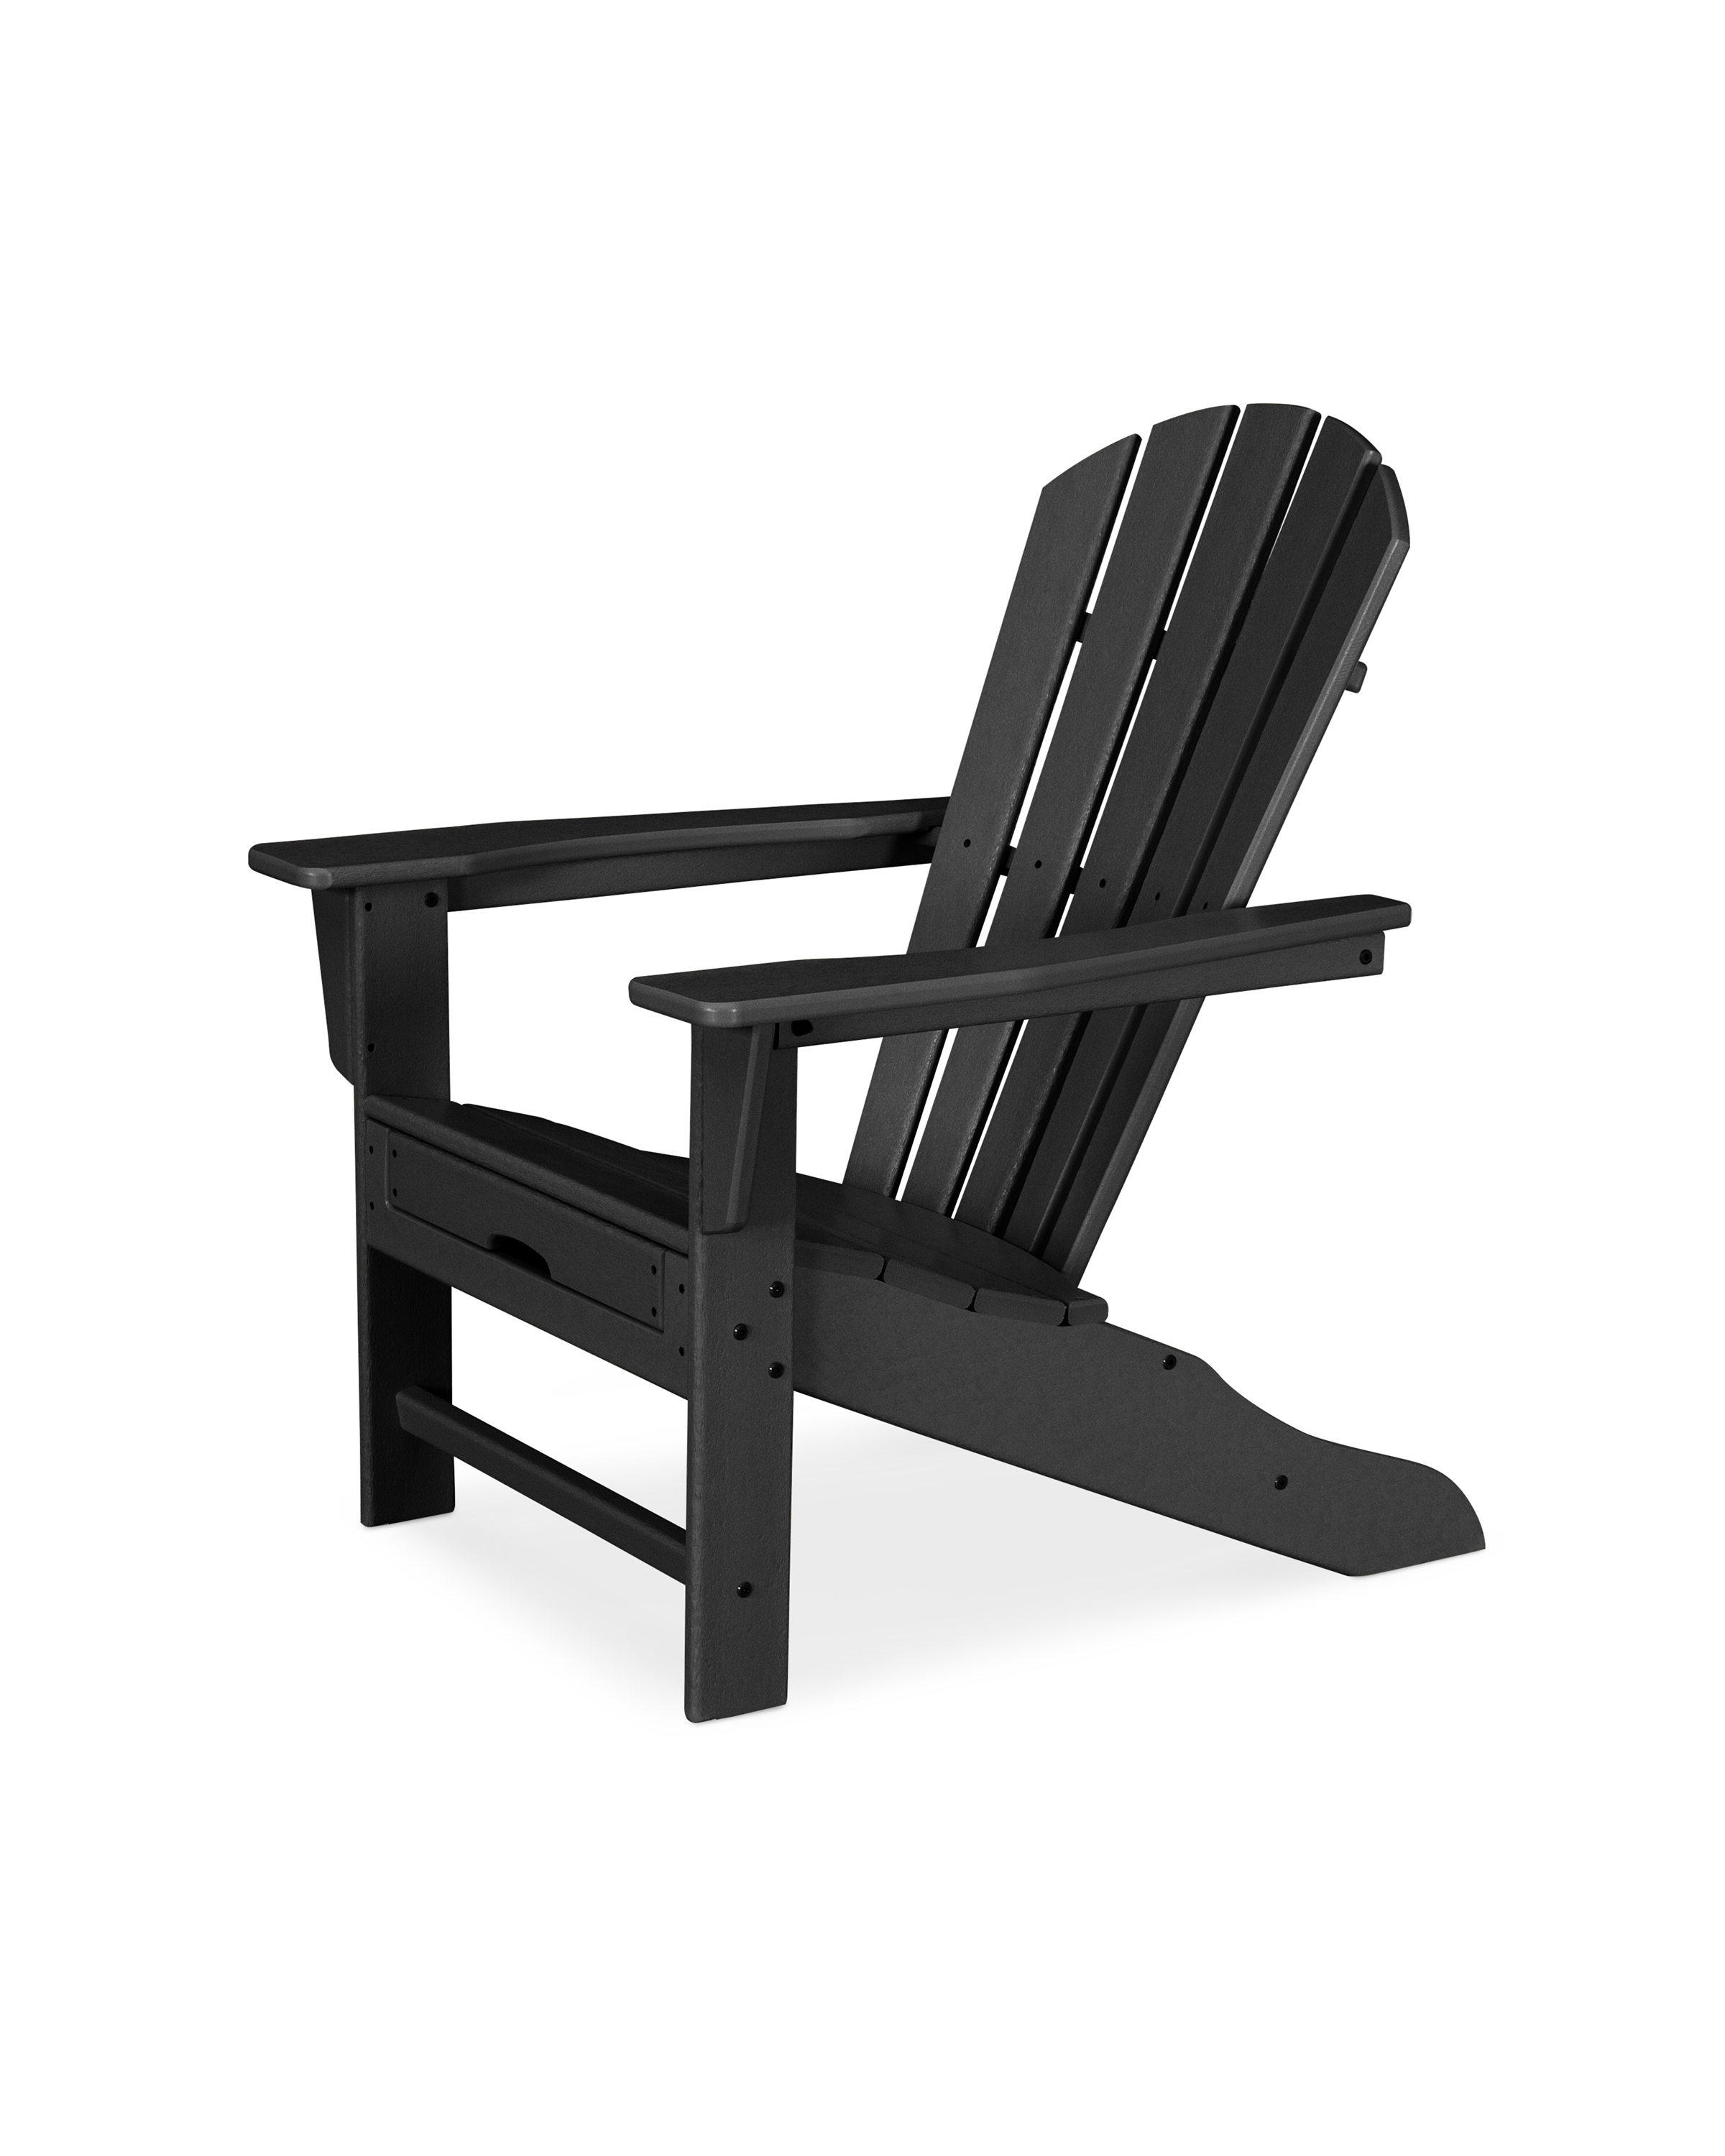 palm coast ultimate adirondack with hideaway ottoman in black product image